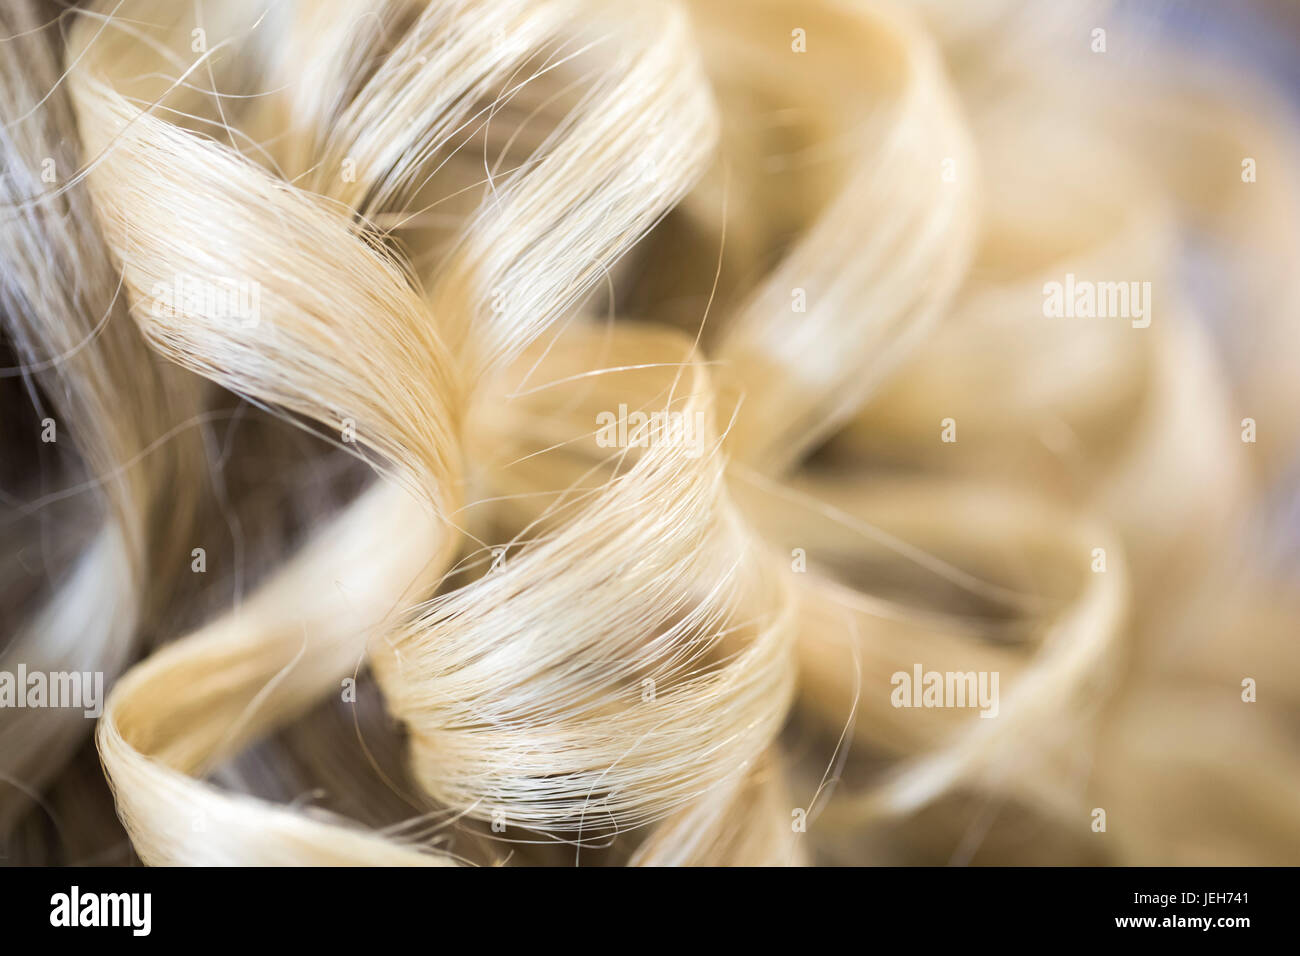 Close-up of blond hair curled in ringlets; Ontario, Canada Stock Photo